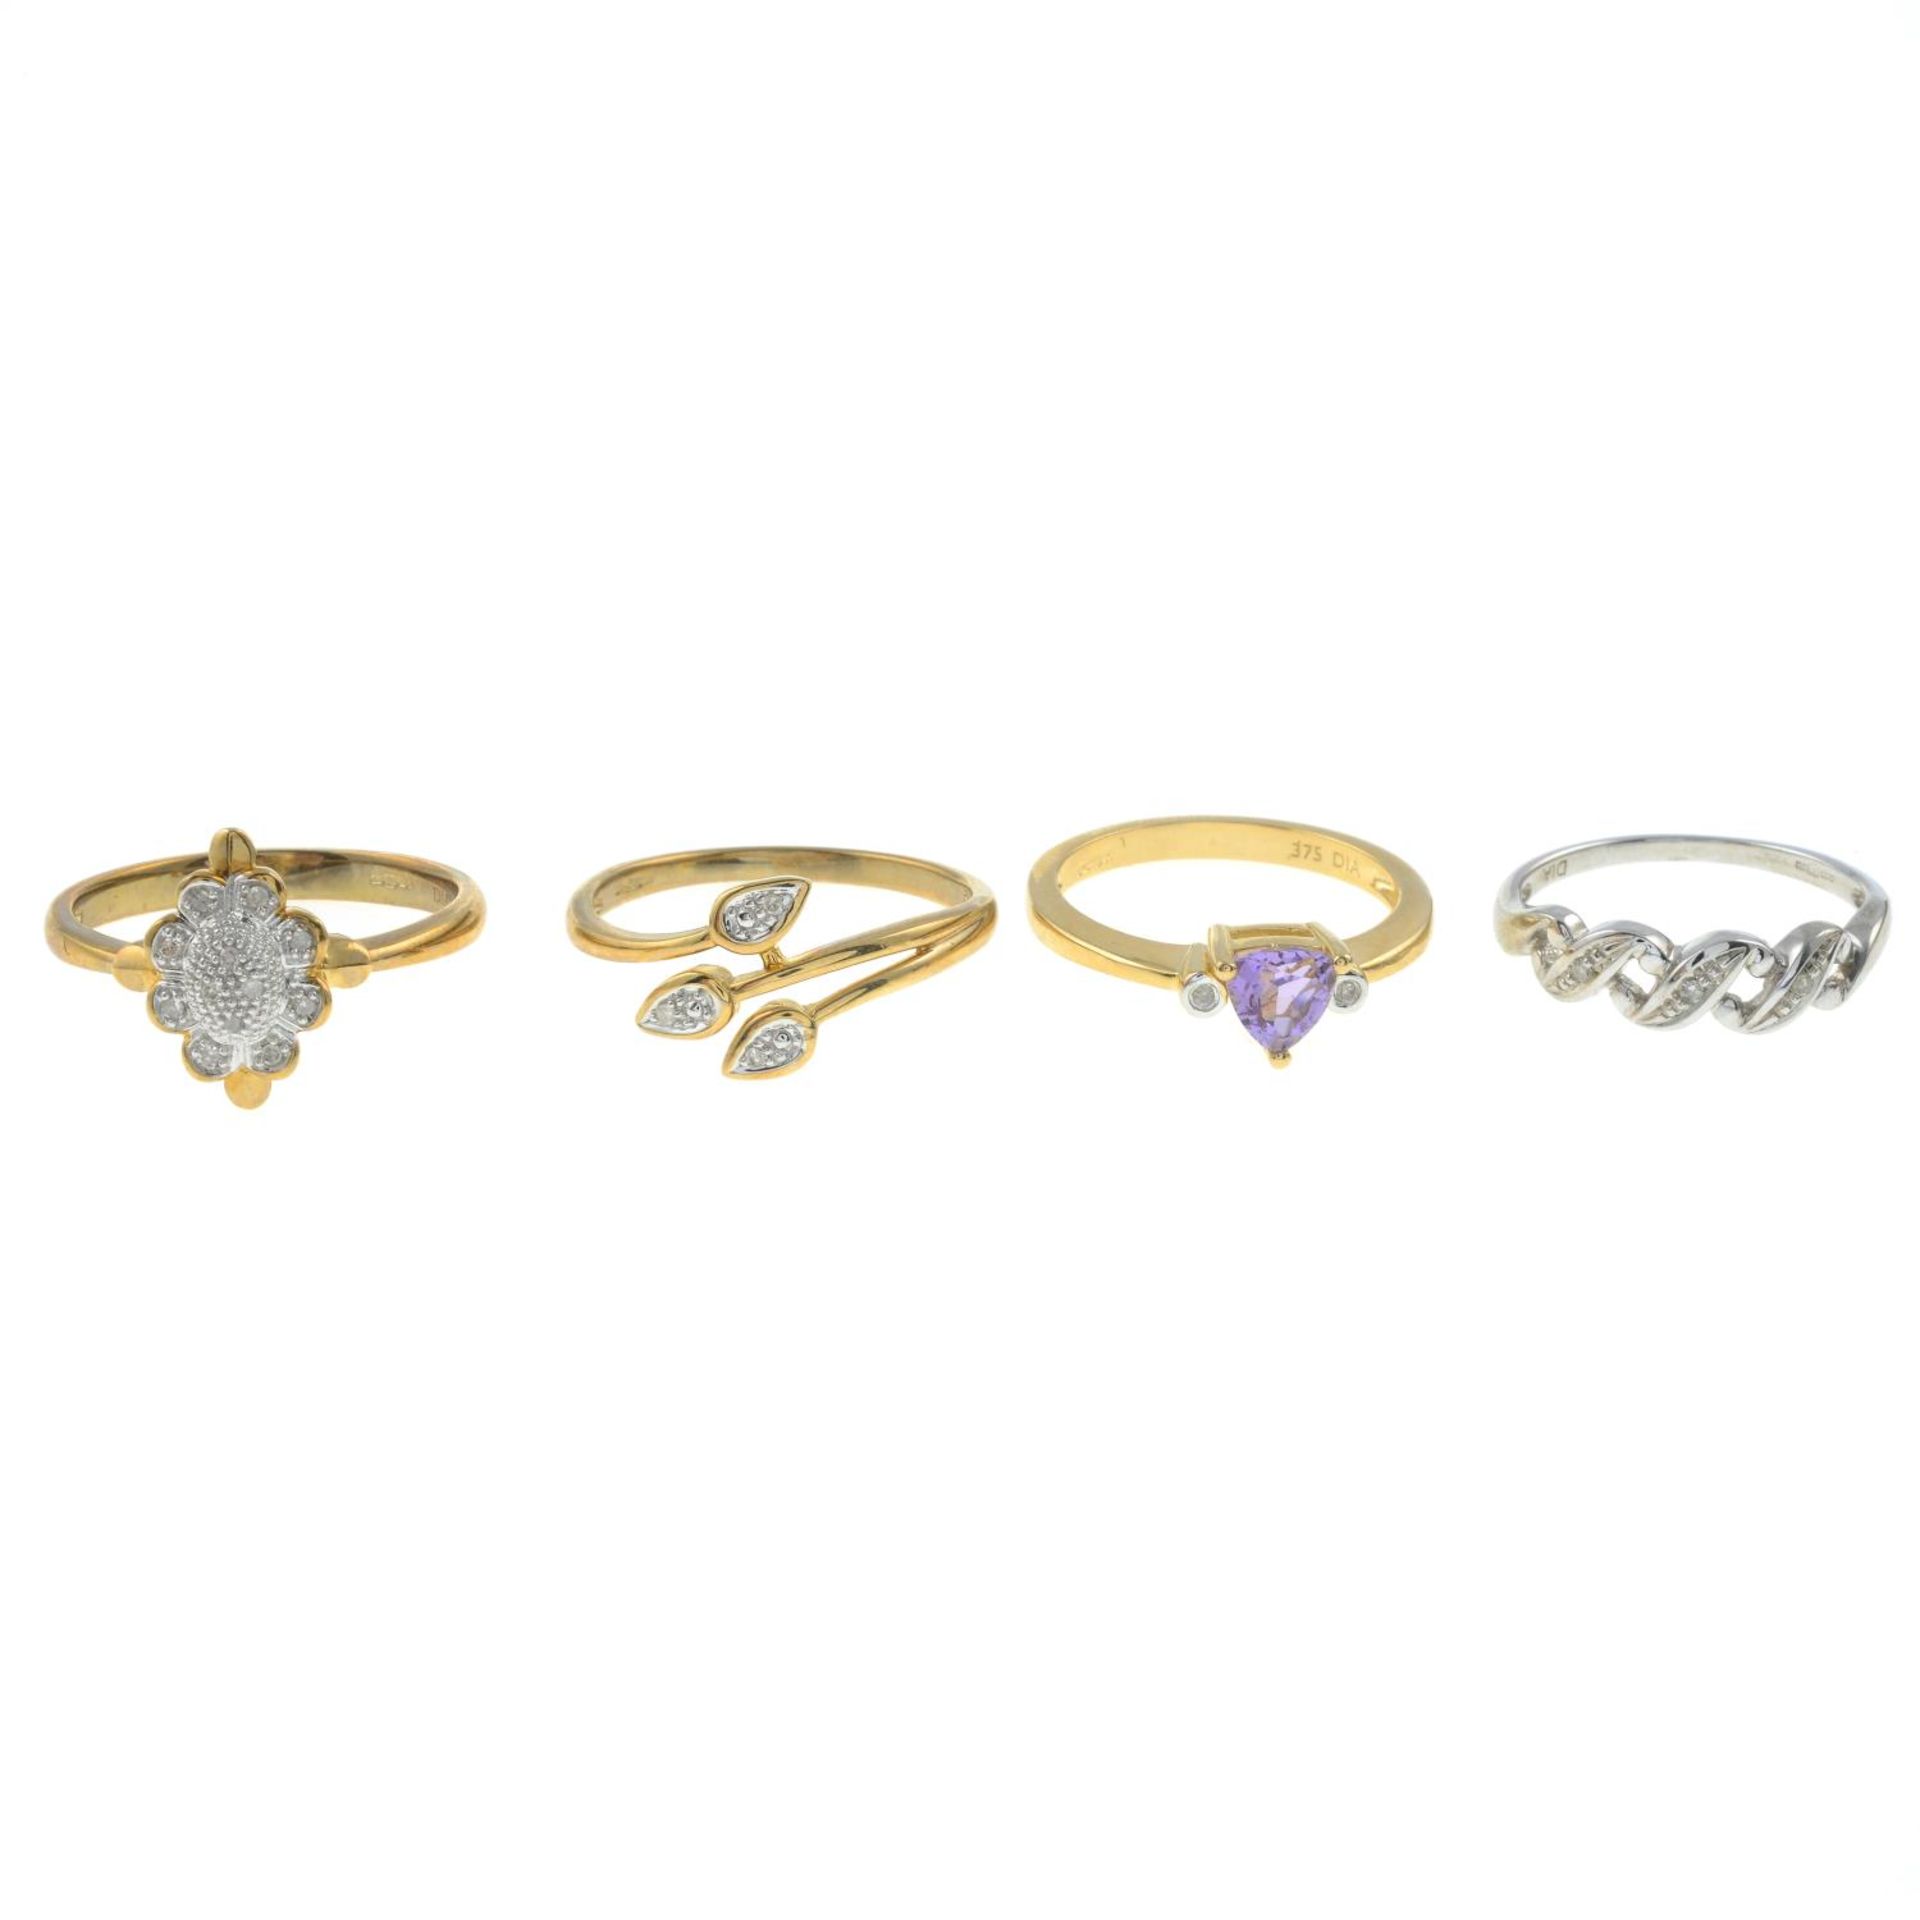 9ct gold amethyst and diamond three-stone ring, hallmarks for 9ct gold, ring size K, 2gms.